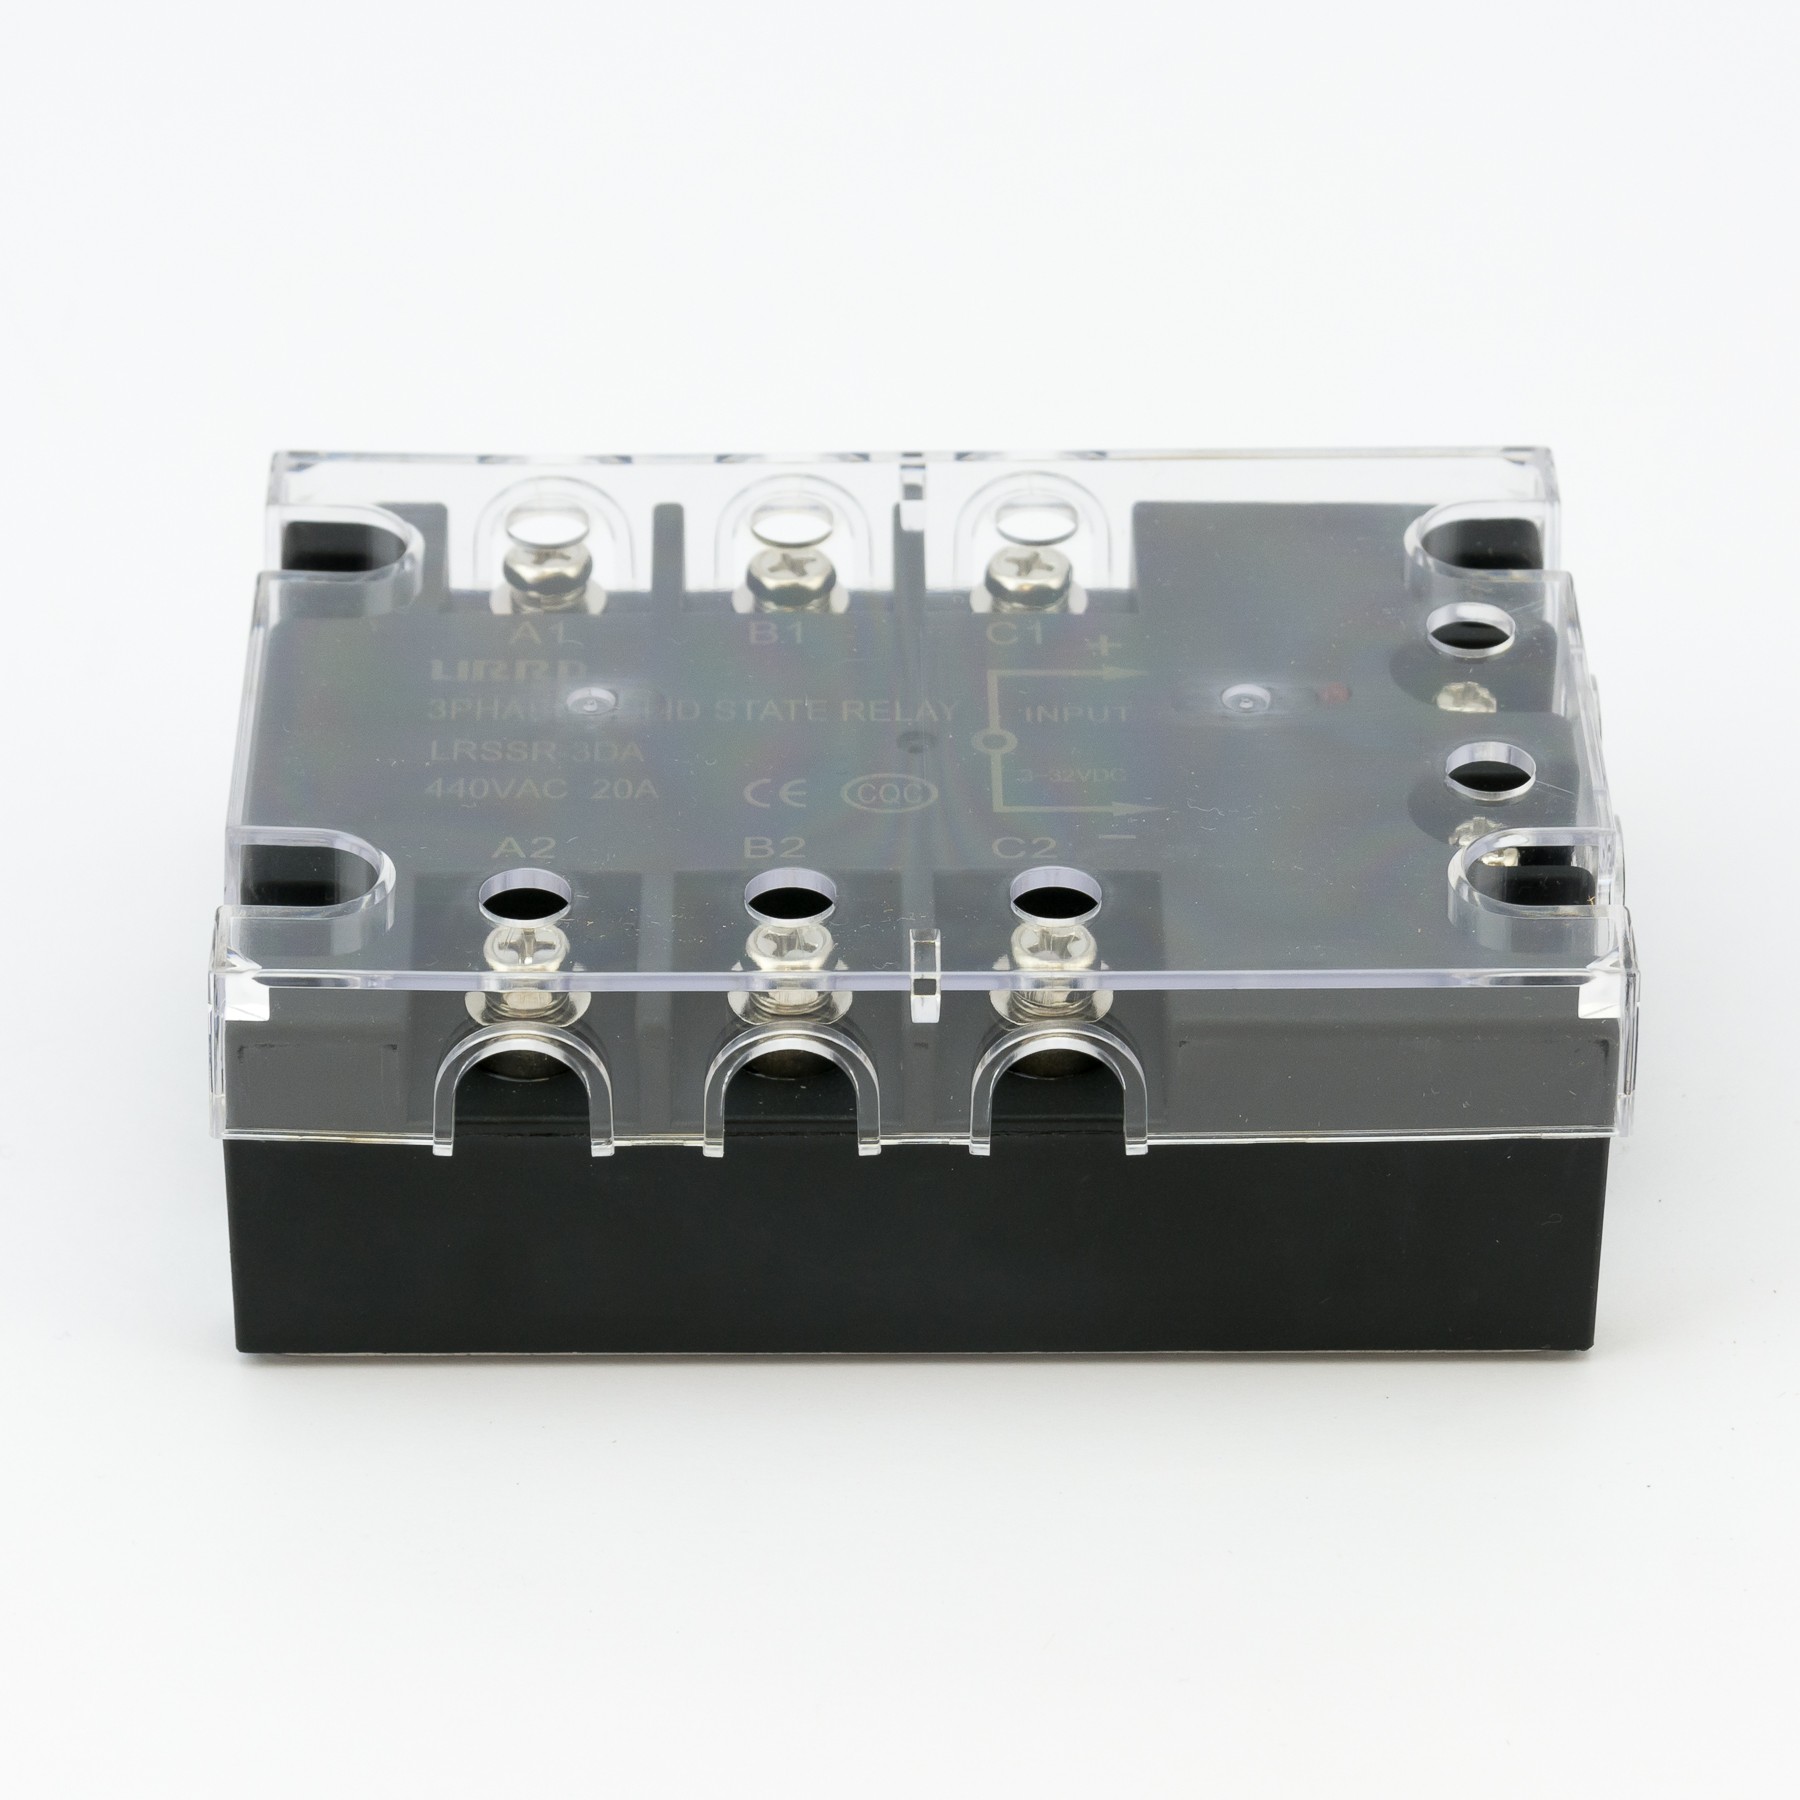 3-phase Solid State Relay (SSR), 20A